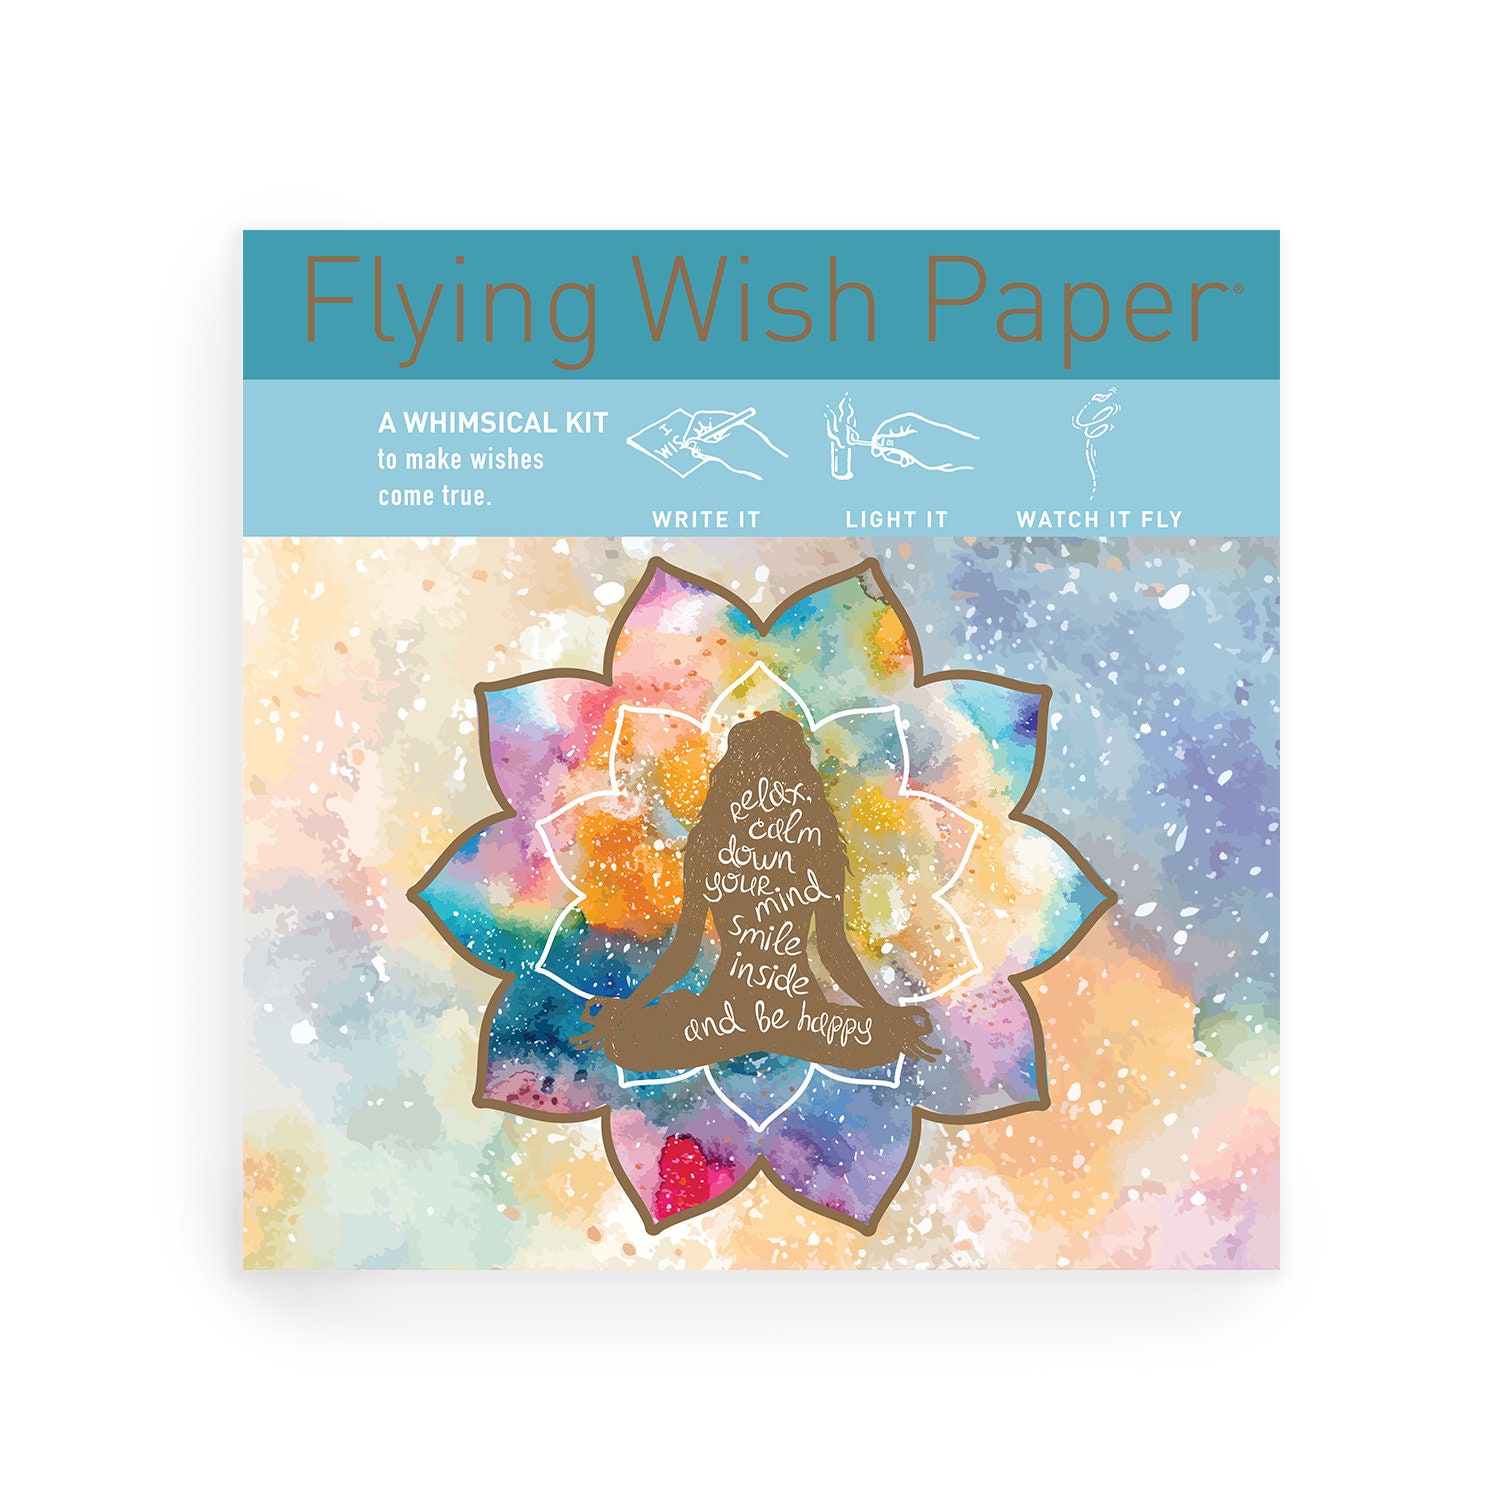 Chakras, Wish Paper, Law of Attraction, Wish Kit, Manifesting Kit,  Meditation Tool, Inspired Gift, Flying Wish Paper, Magic Flash Paper 